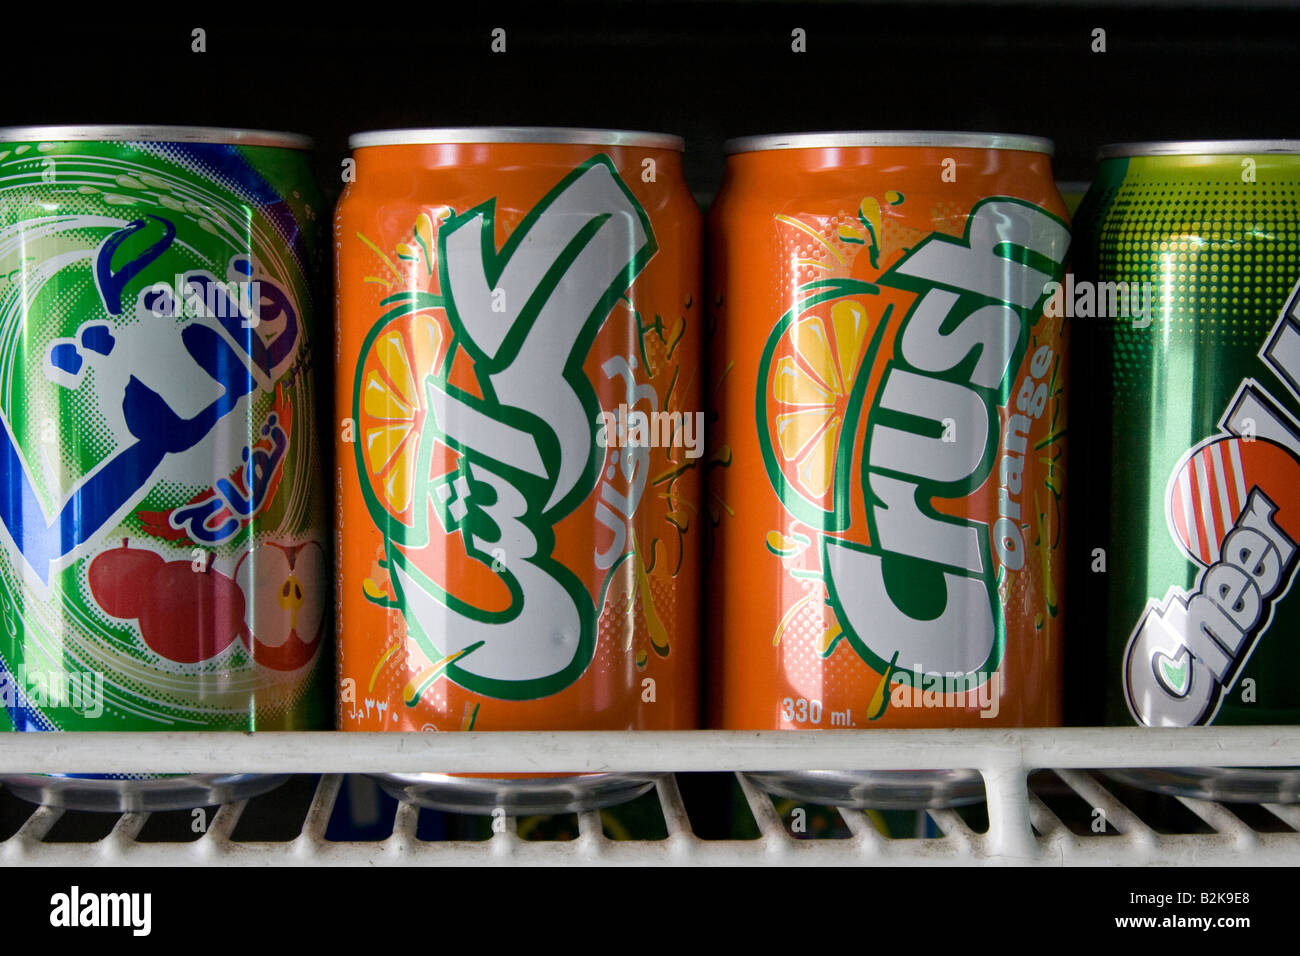 Orange Crush Cans in Arabic and English in a Refridgerator in Damascus Syria Stock Photo